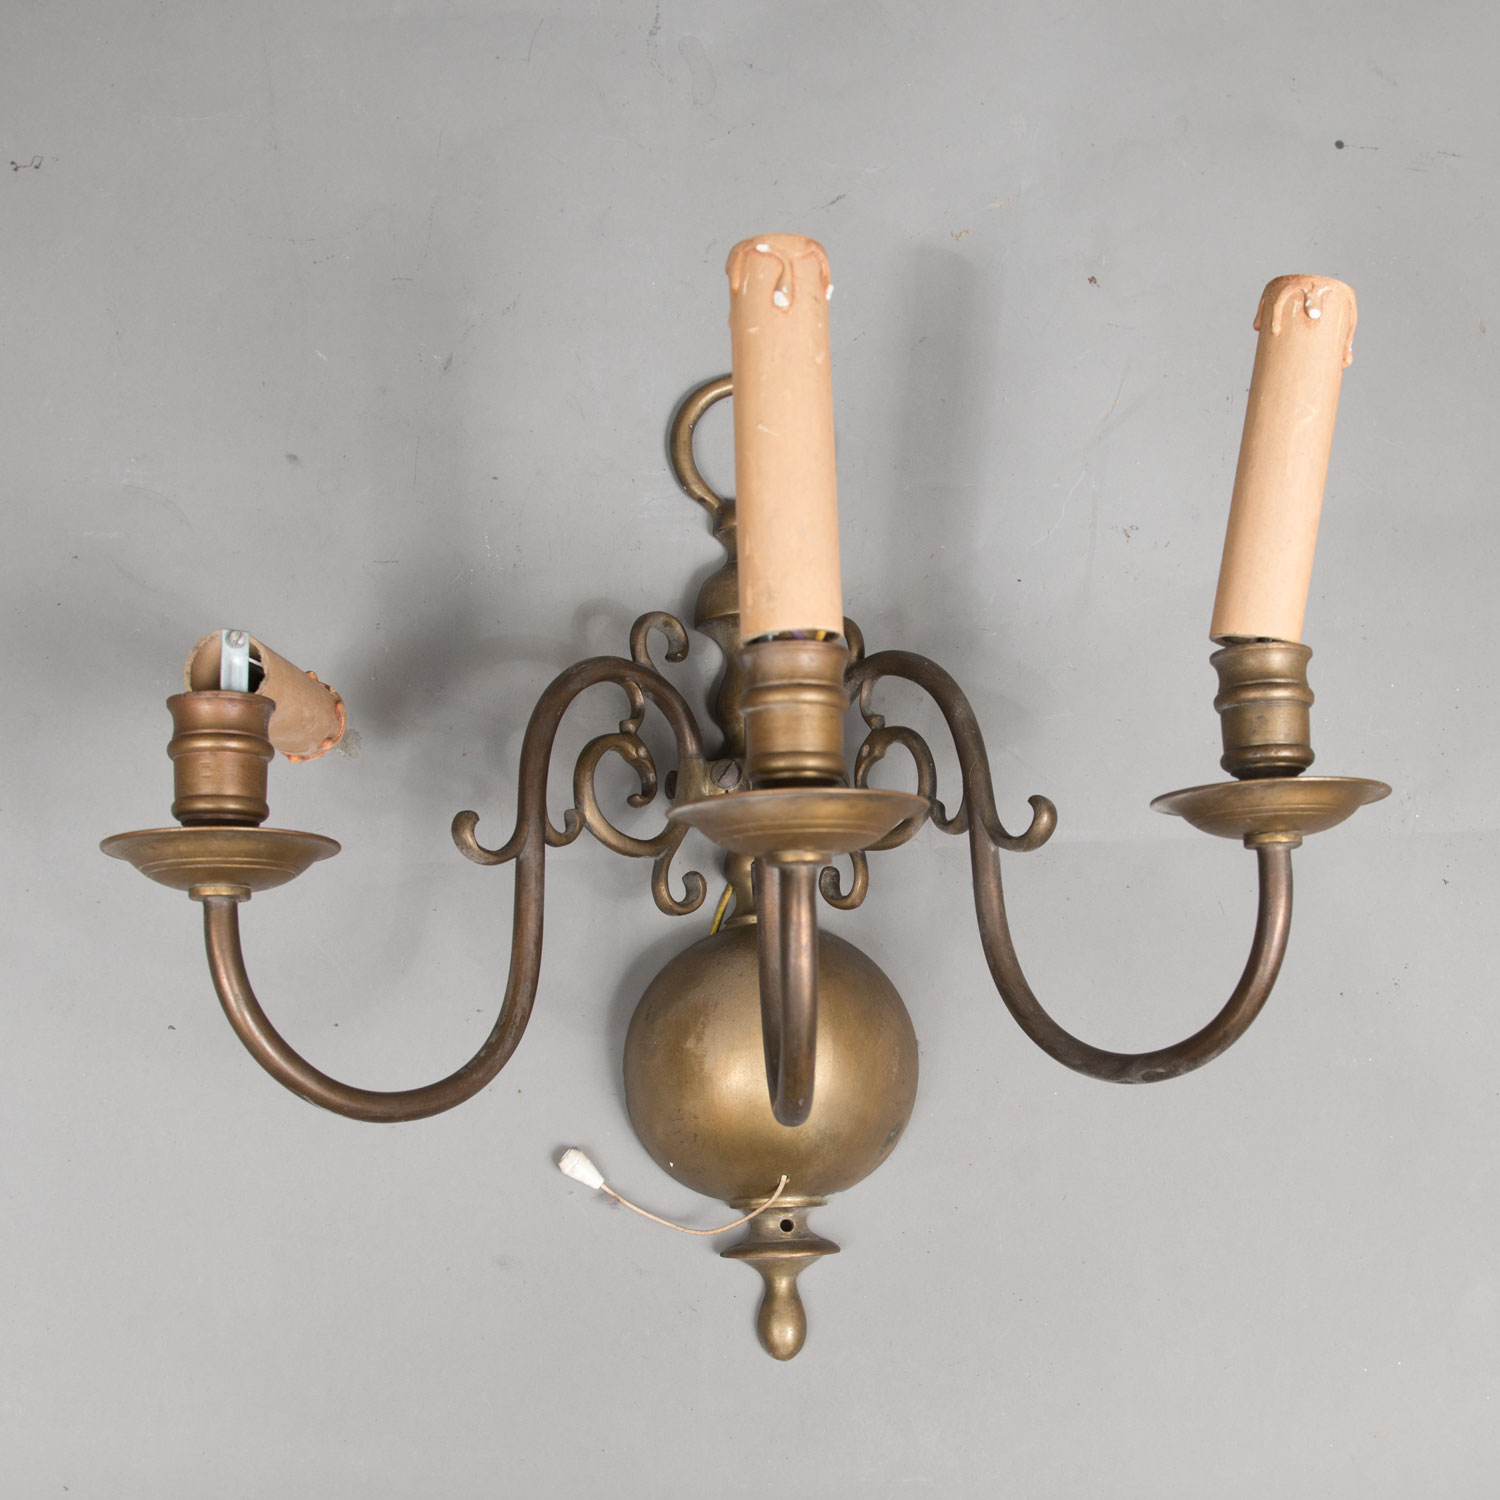 Pair of Flemish Wall Lights - Image 3 of 3